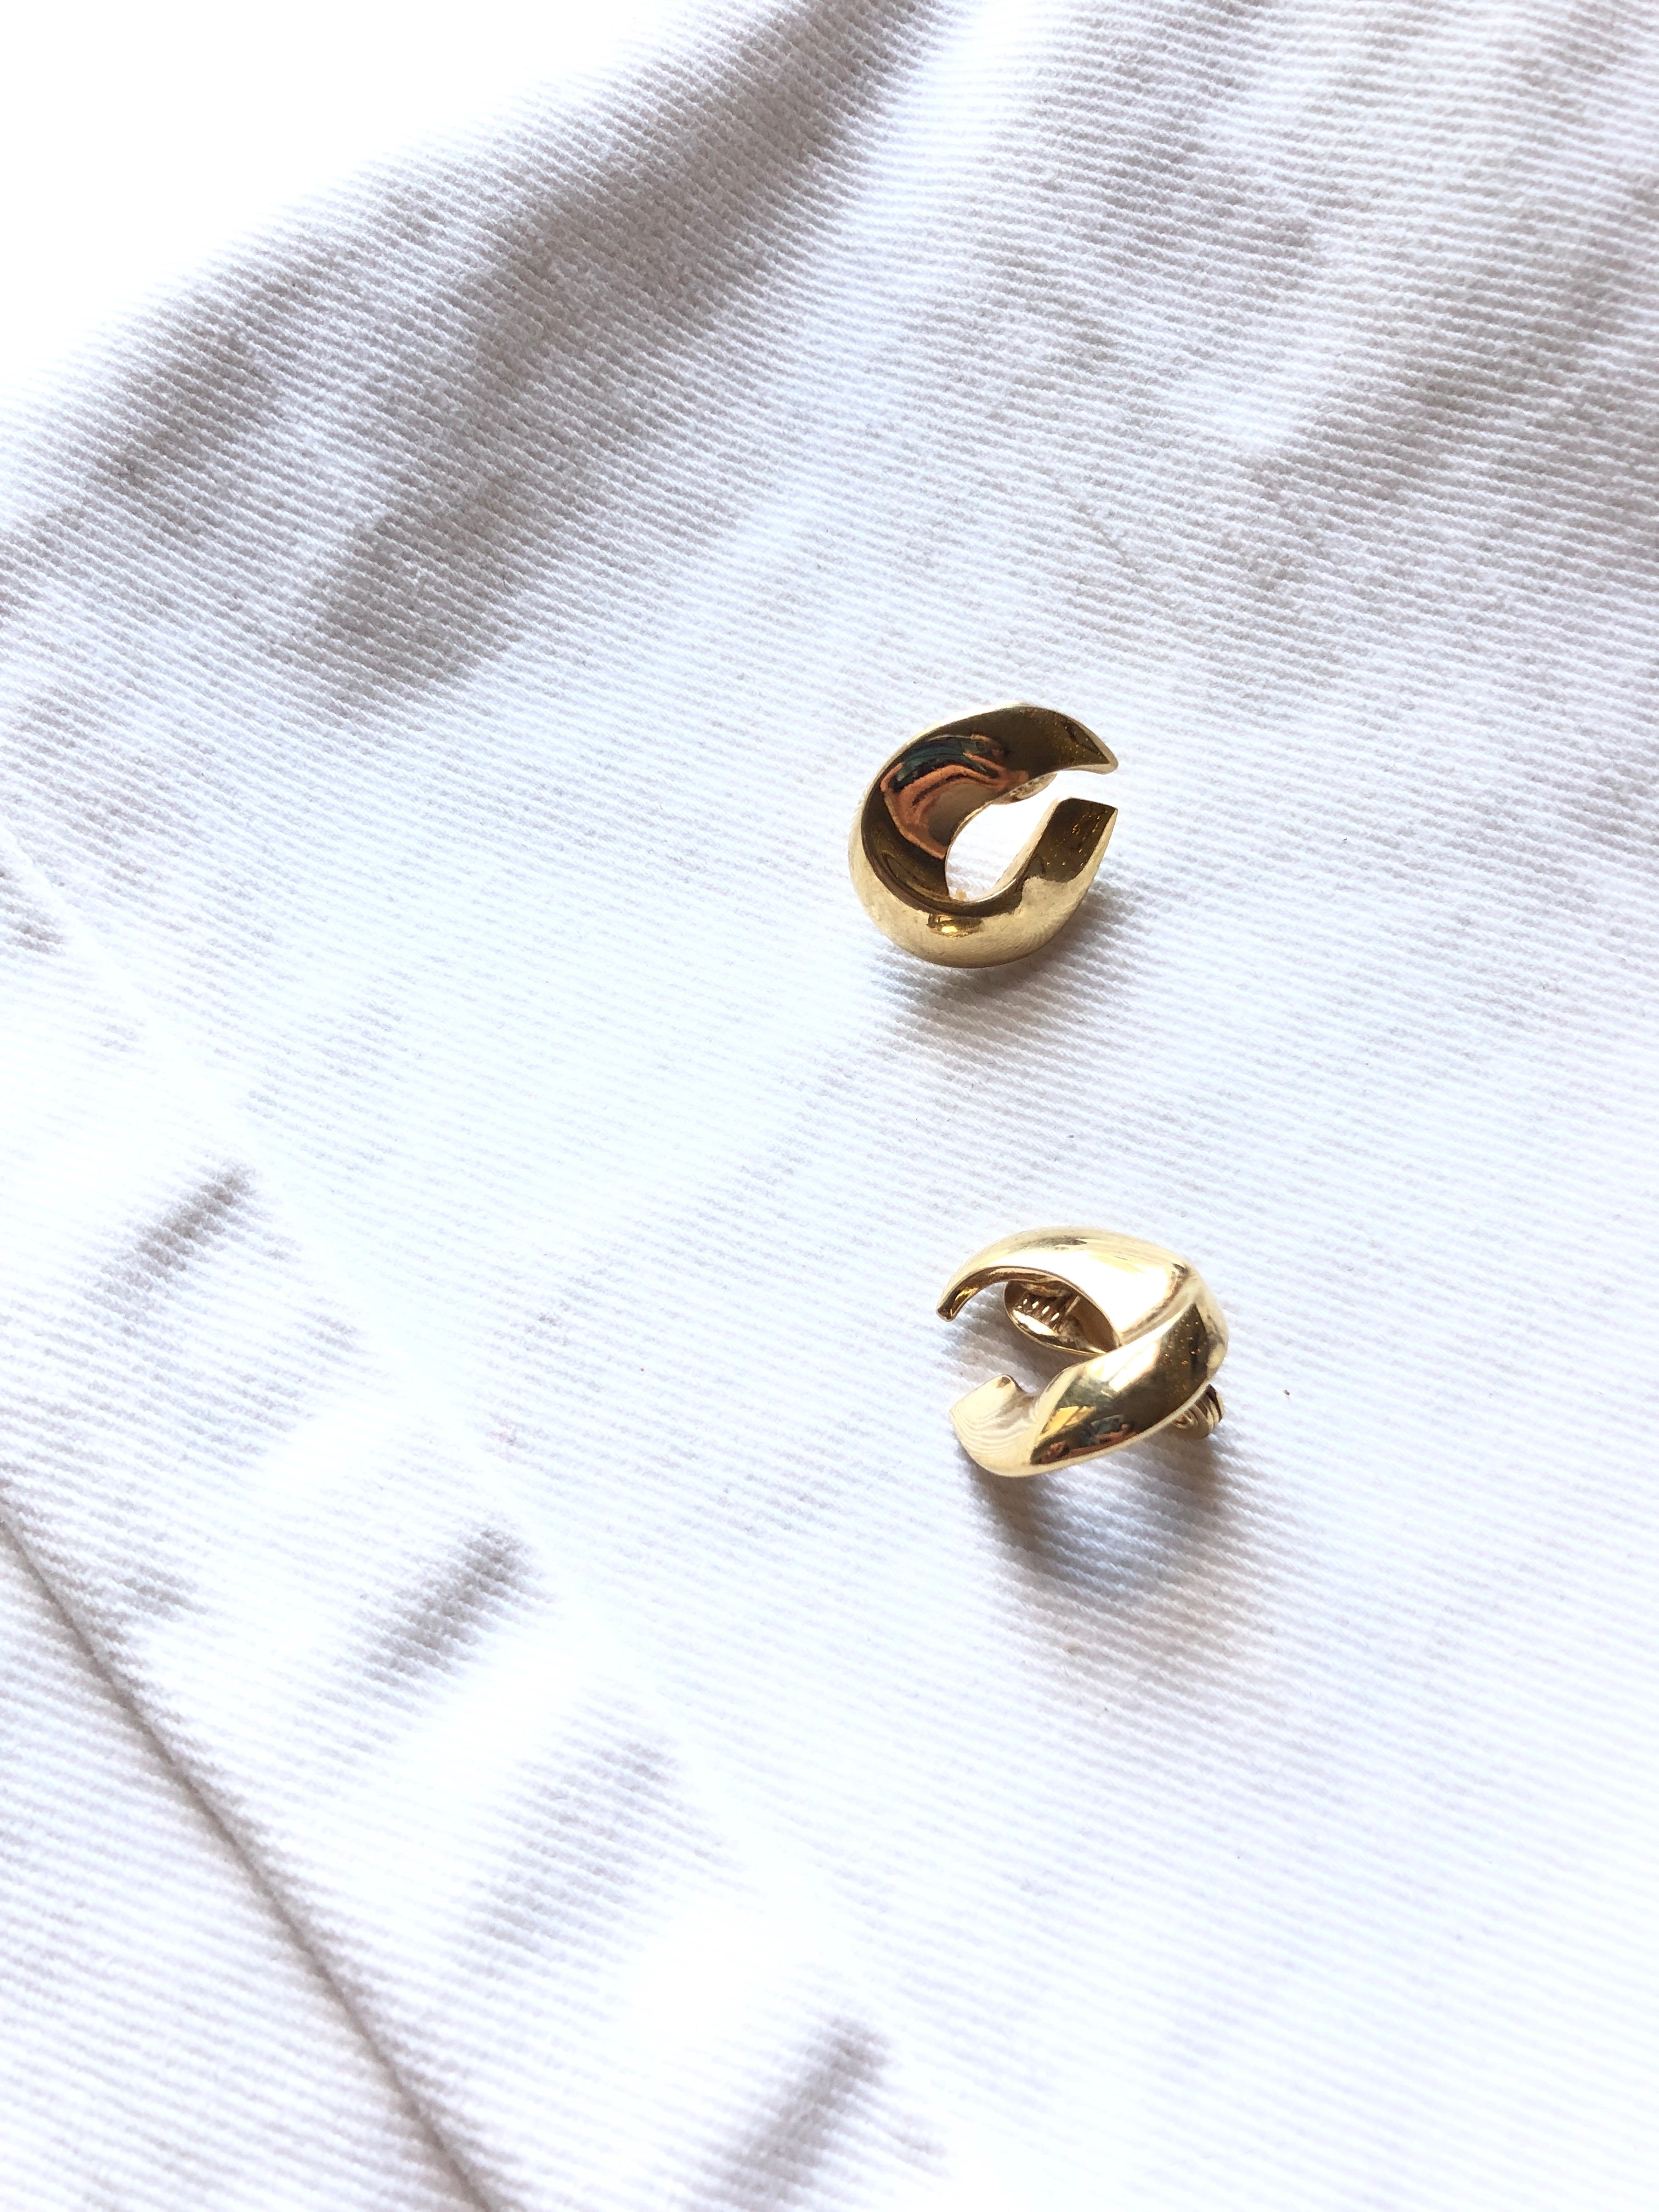 Vintage Monet Abstract Gold Earrings